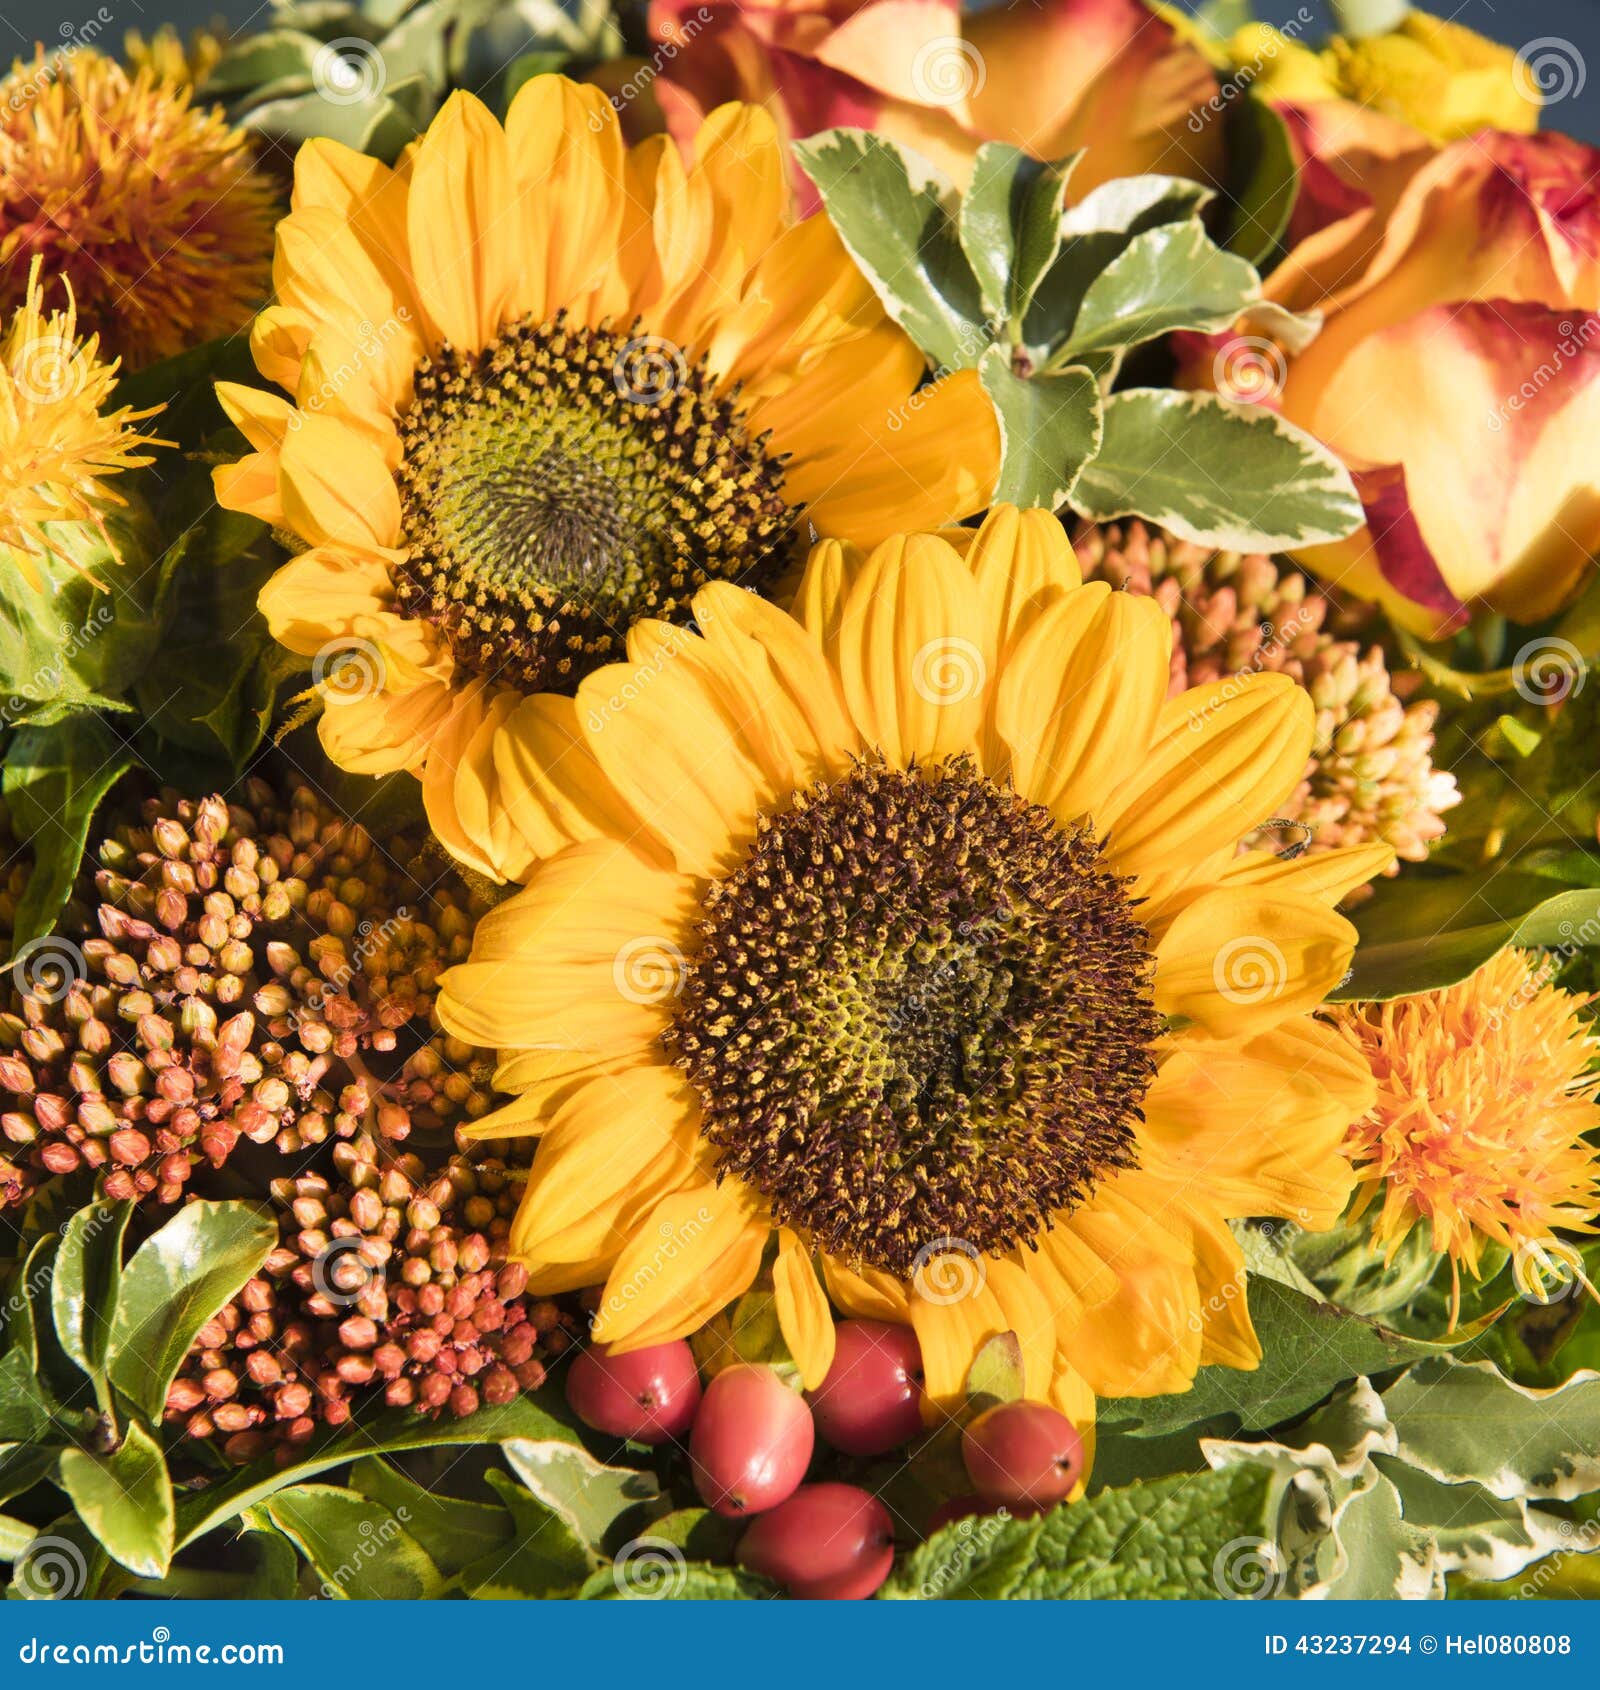 sunflowers and fall flowers. yellow sunflowers, orange roses, rose hips and more flowers of autumn